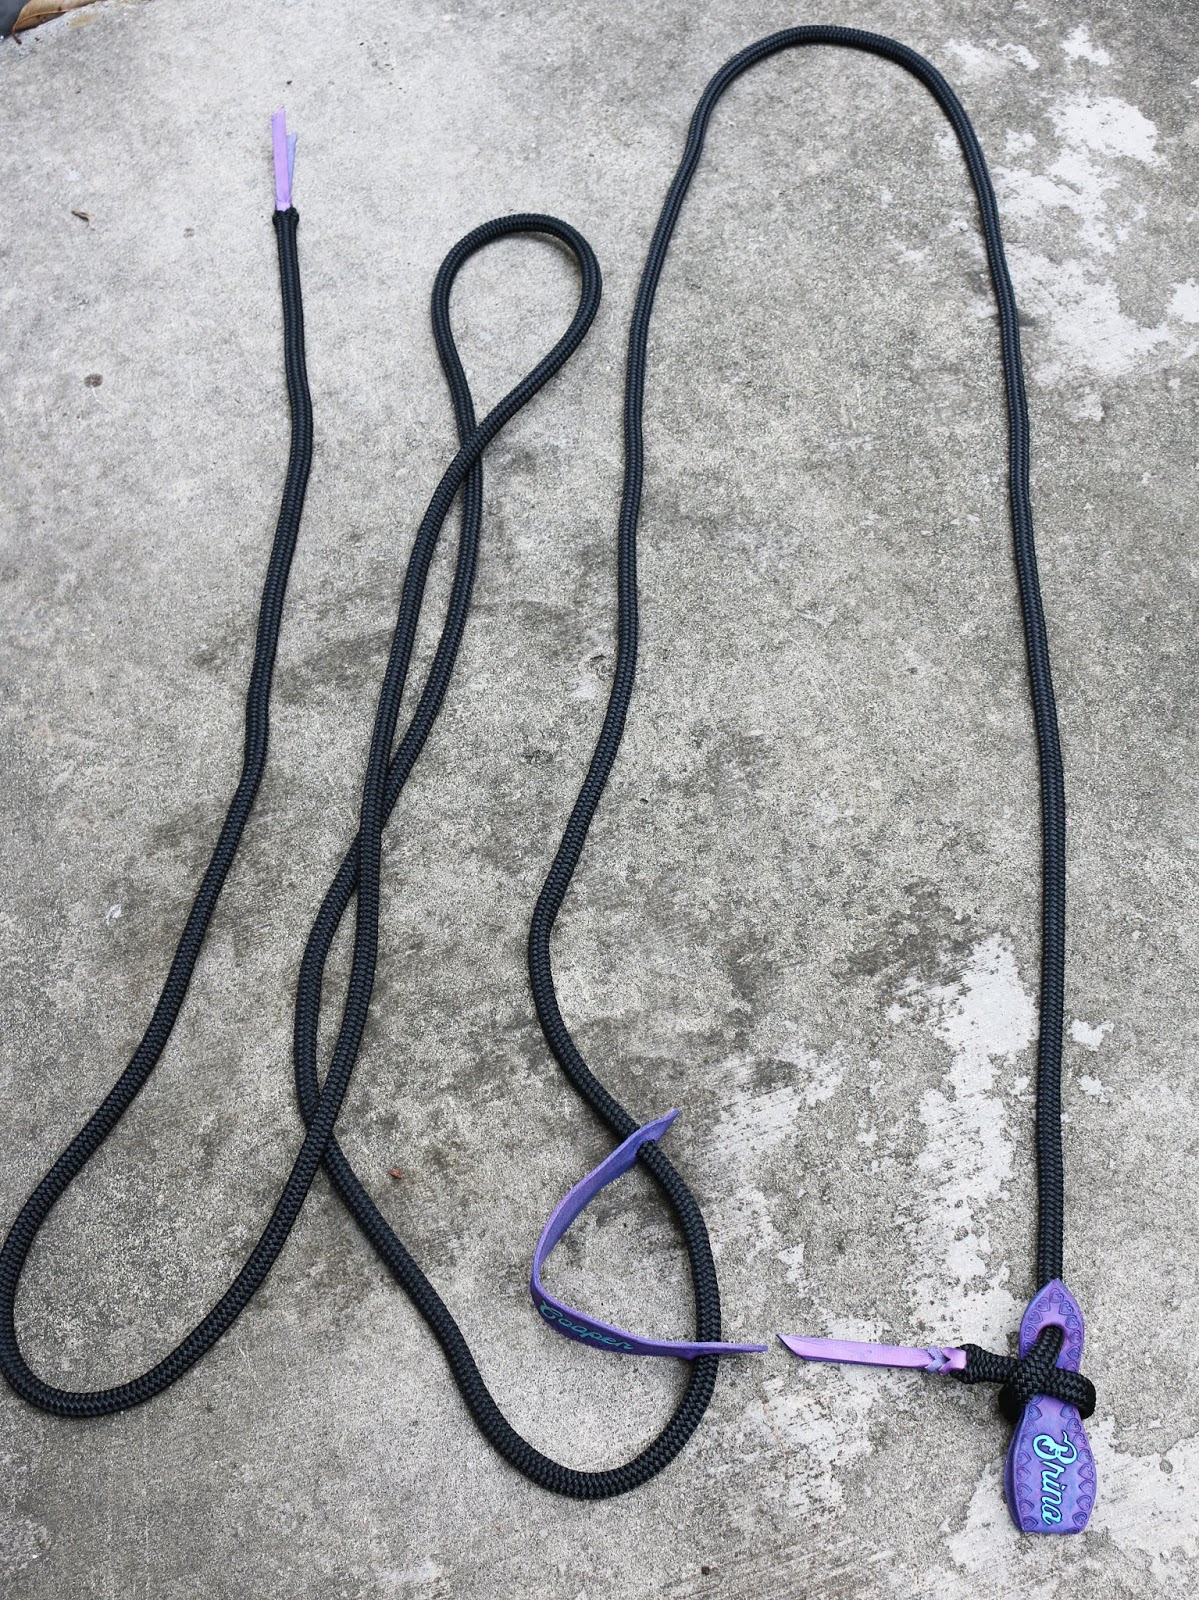 Rachel Fail Model Horse Tack: How to Tie a Mecate onto Slobber Straps